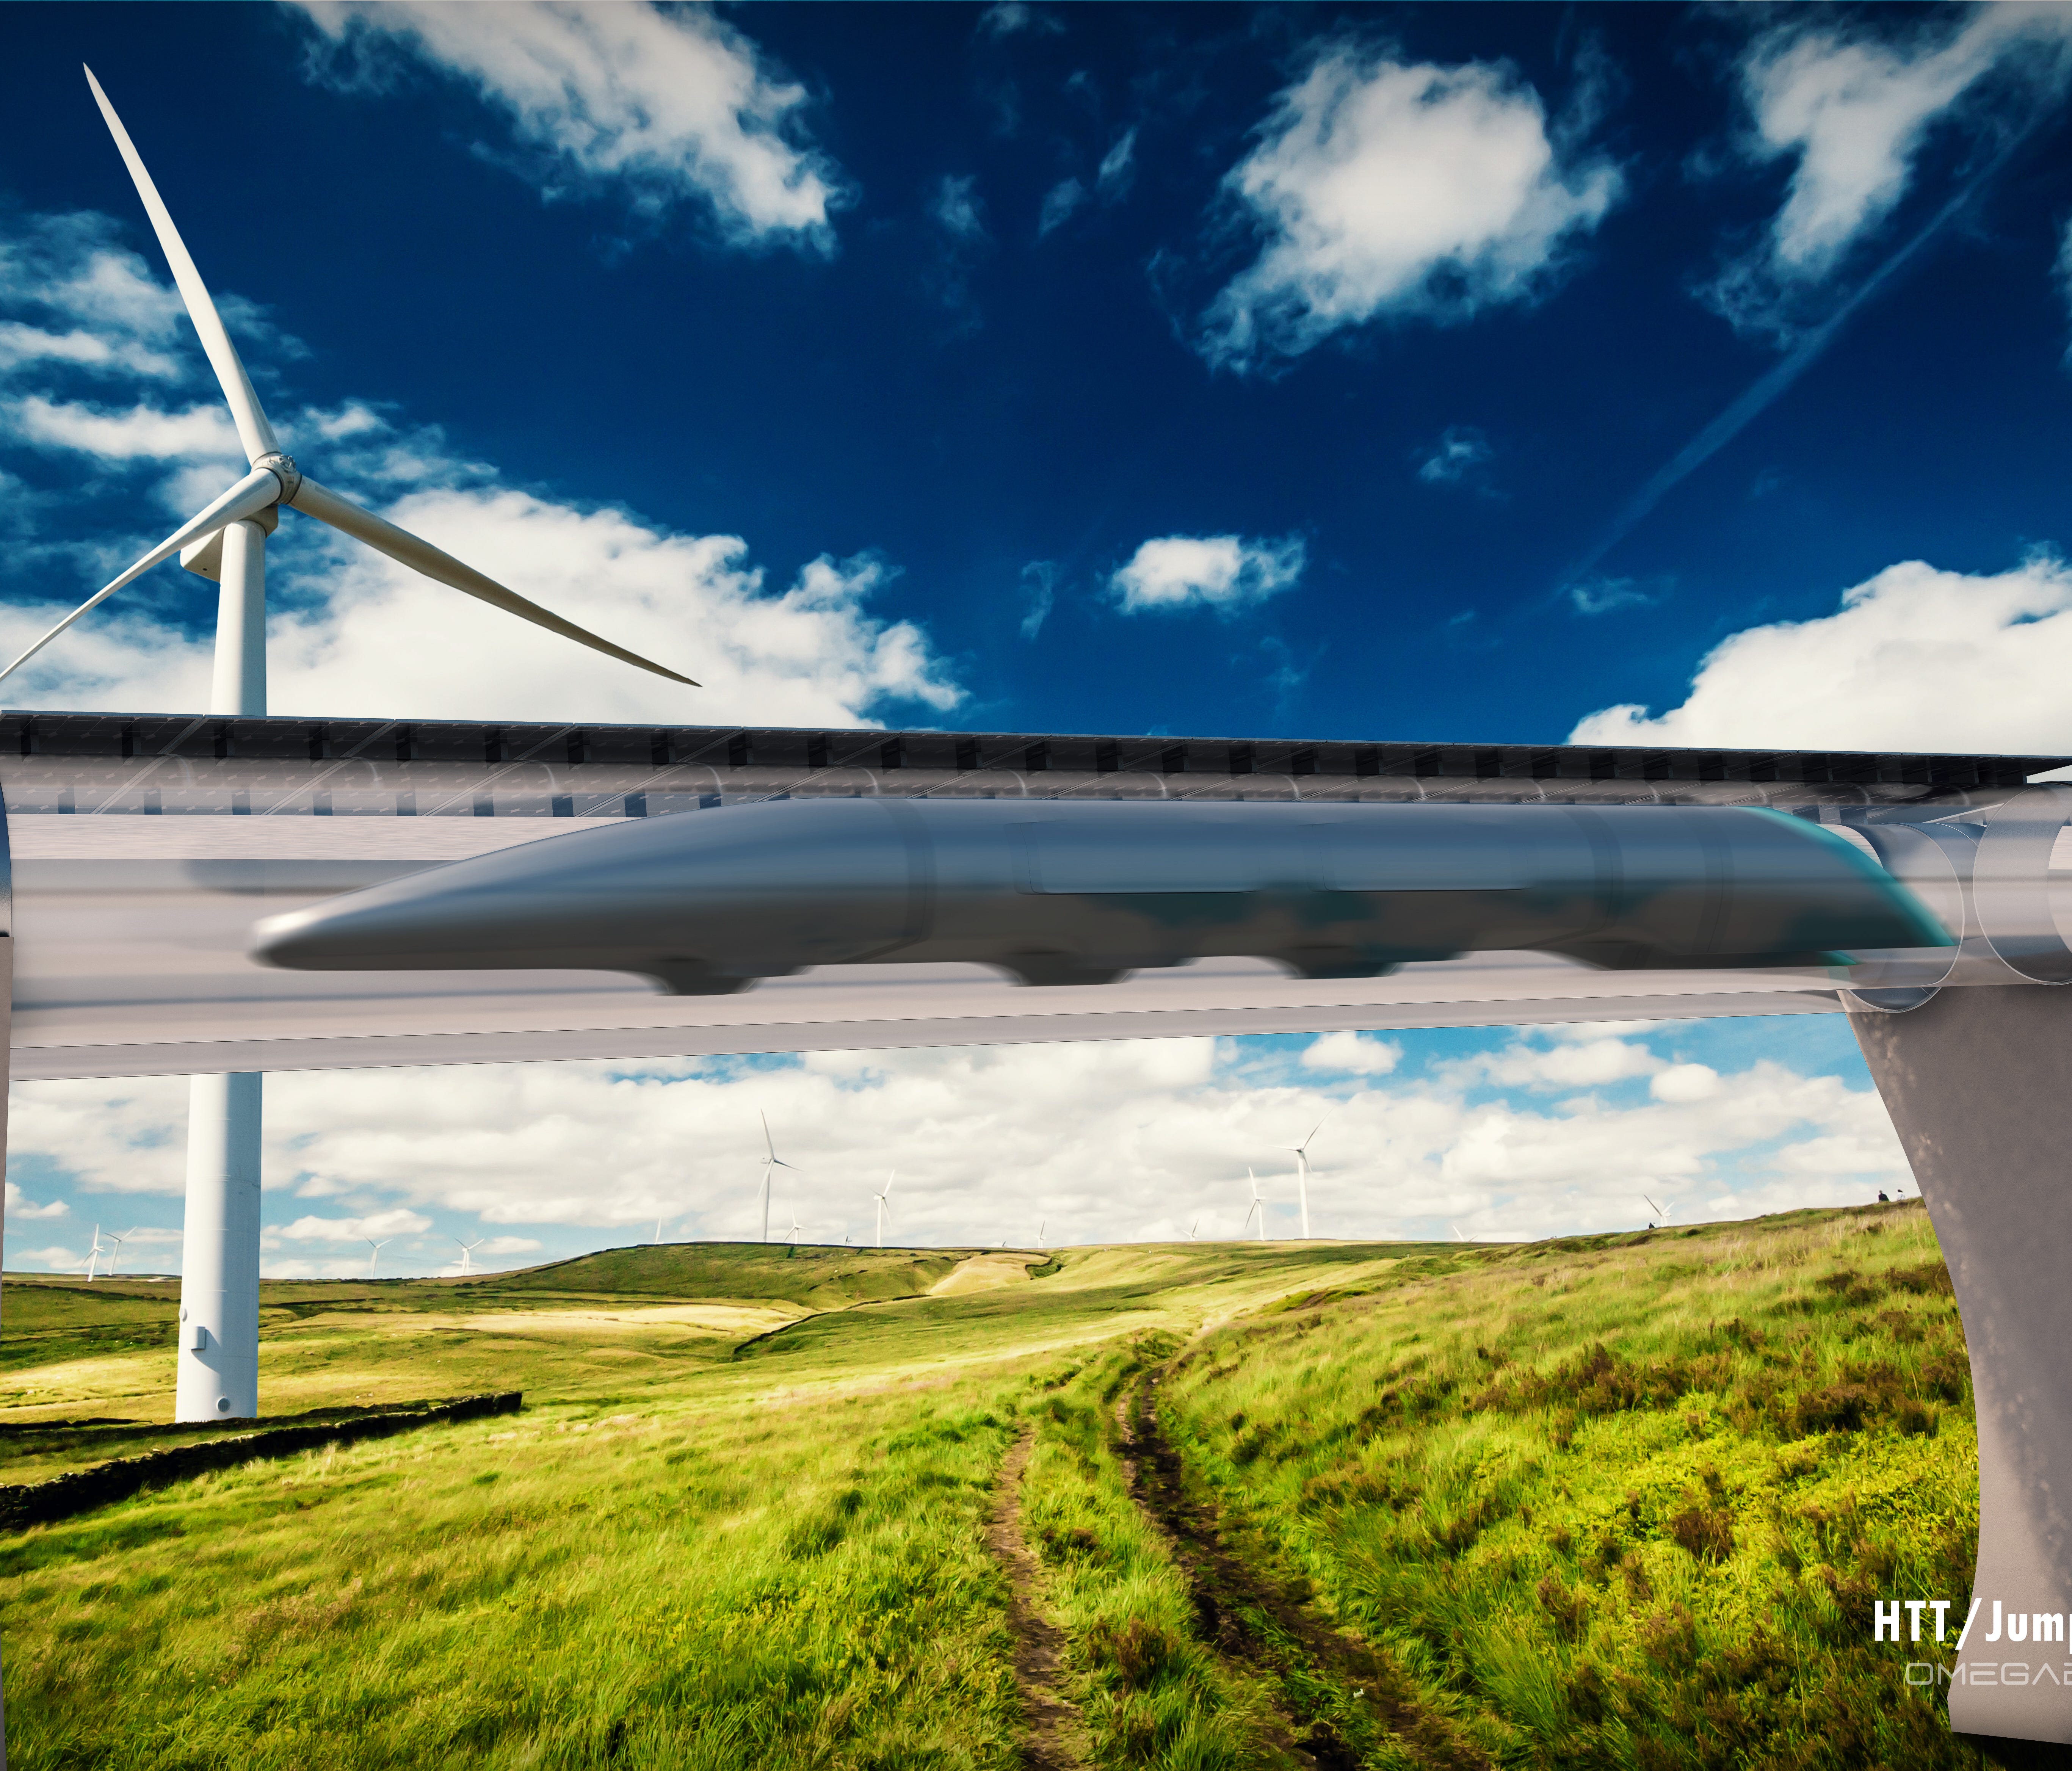 A sketch showing what HTT's hyperloop system could look like zipping through the countryside.